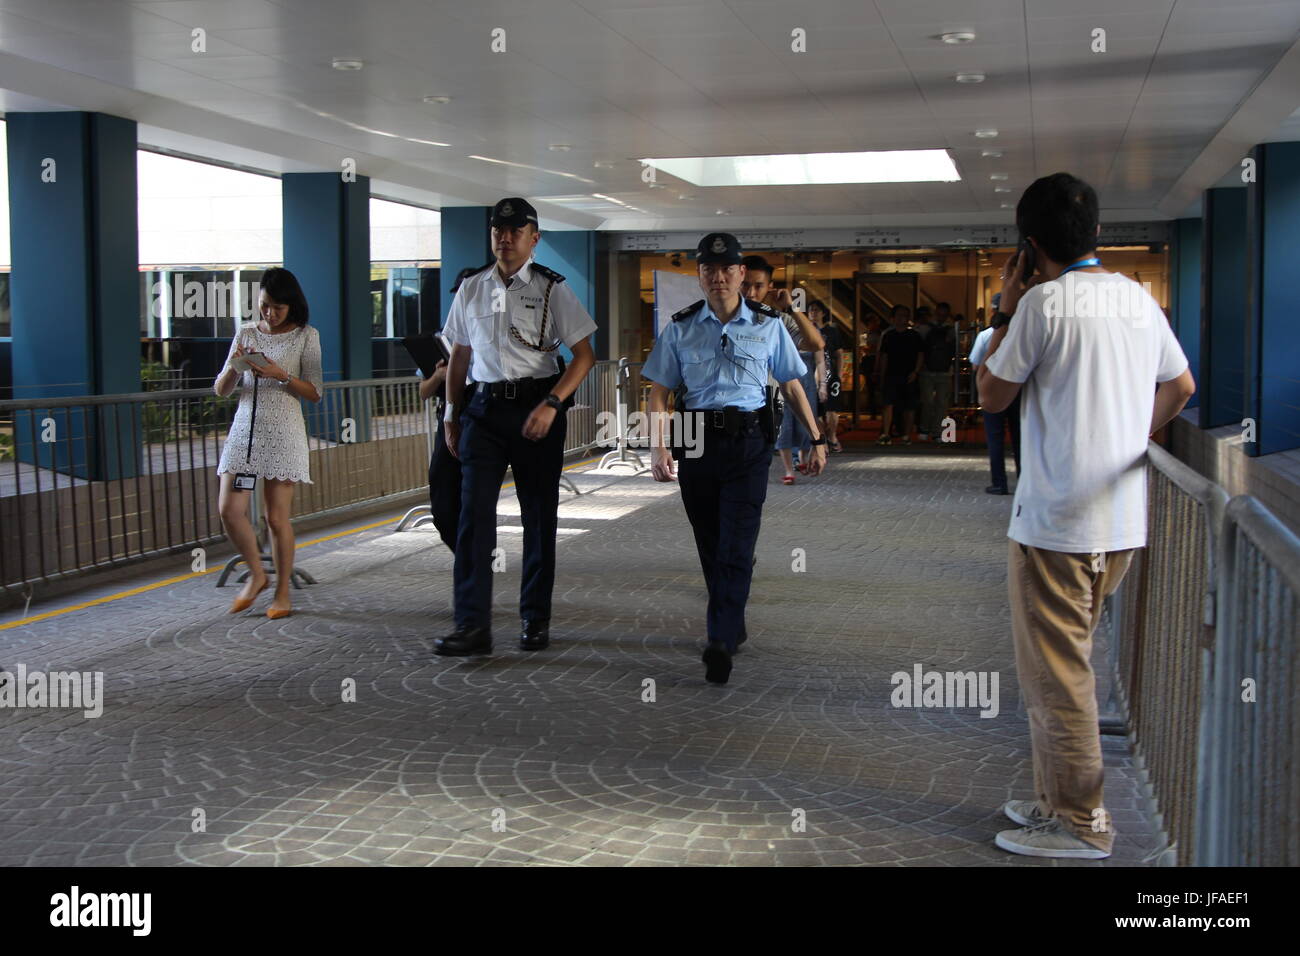 Right outside Convention Plaza in the heart of Hong Kong, the footbridge experienced great police presence on the first day of Xi Jinping's visit. Stock Photo